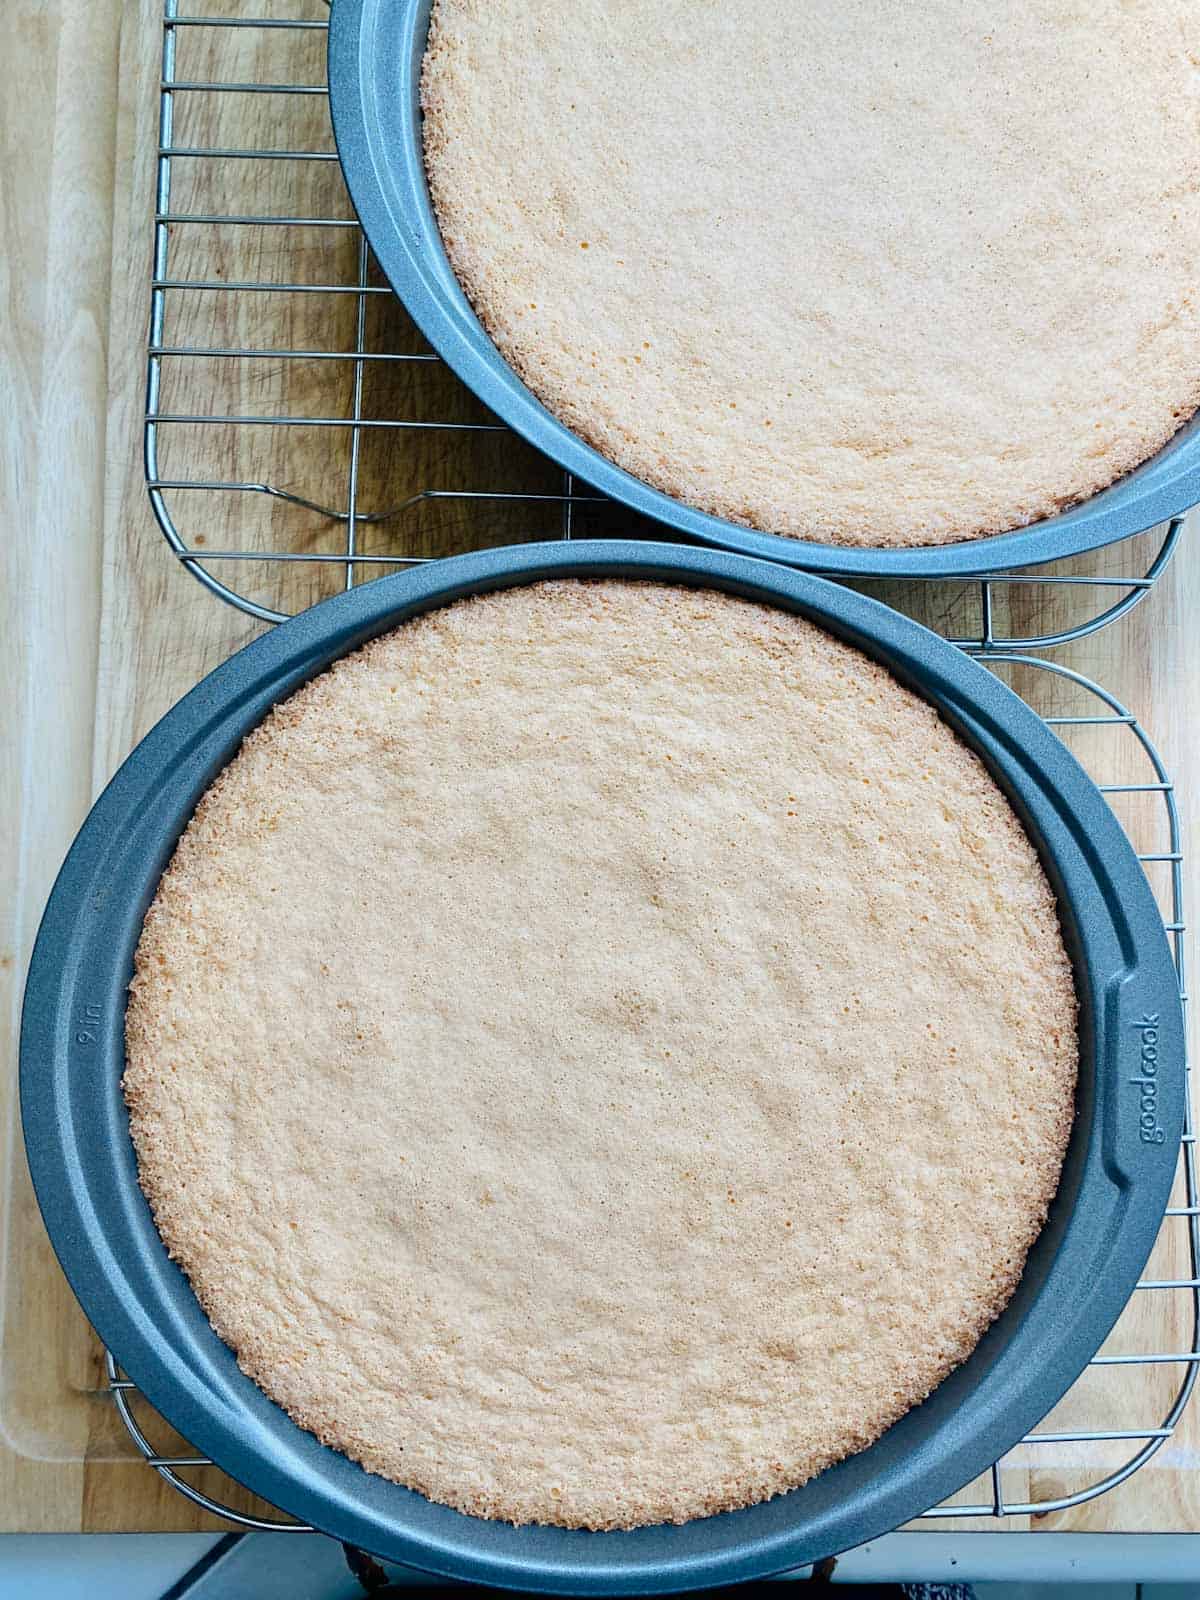 sponge cakes in baking pans cooling on wire racks